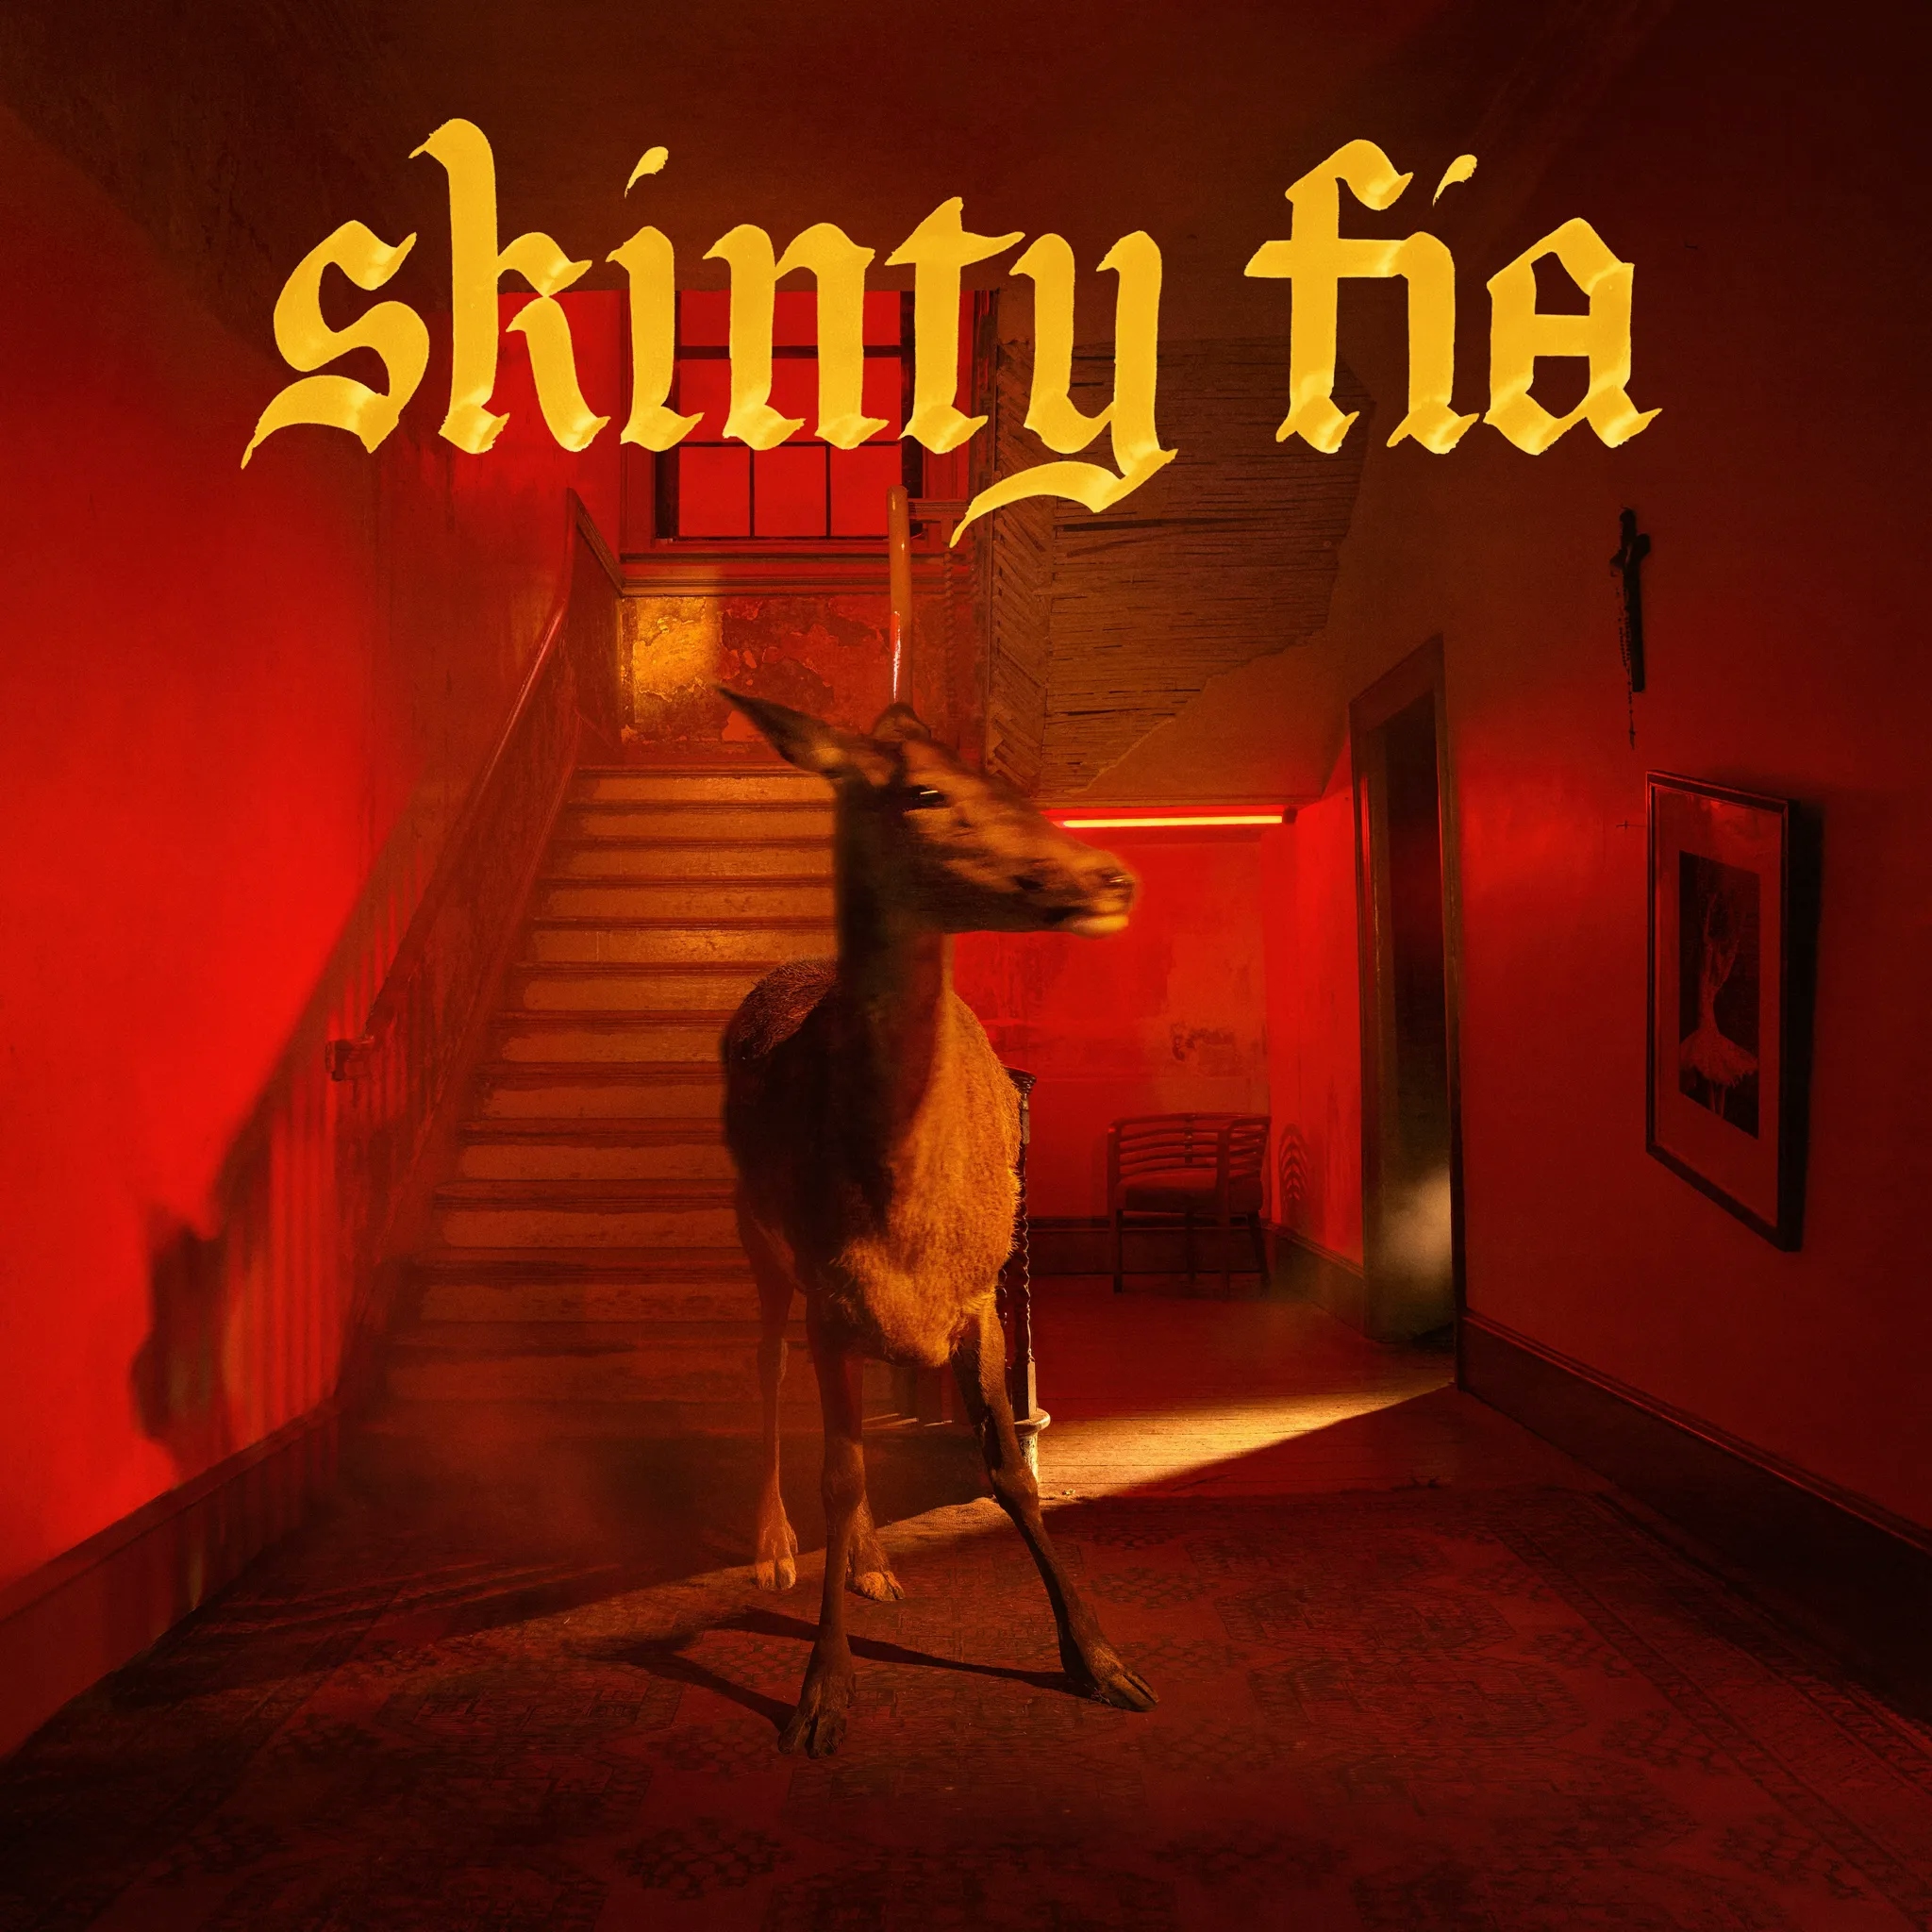 Album artwork for Skinty Fia by Fontaines D.C.